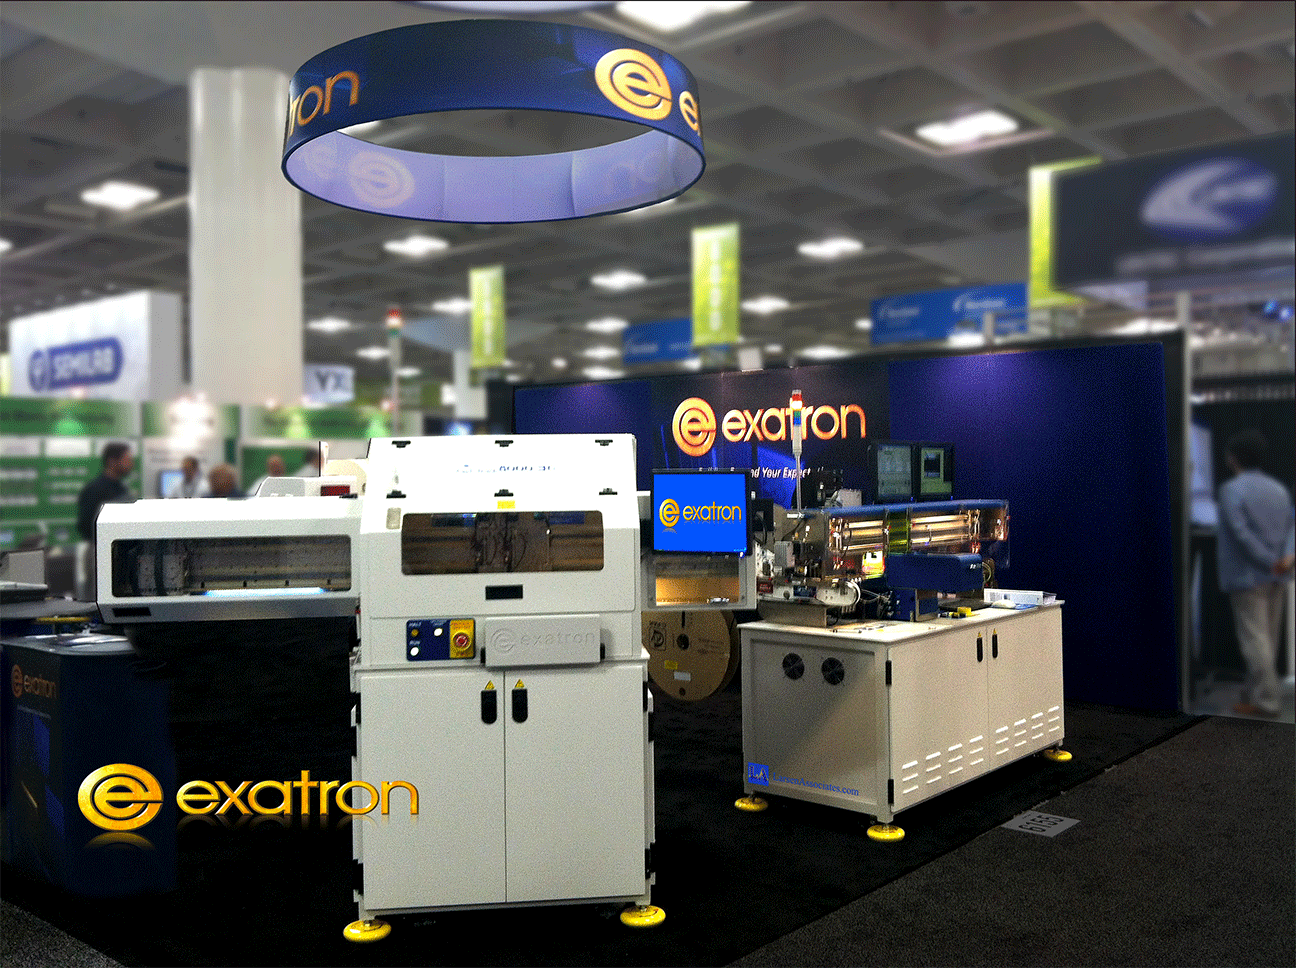 Semicon West 2021 Handlers, ATE, Test equipment, from Exatron